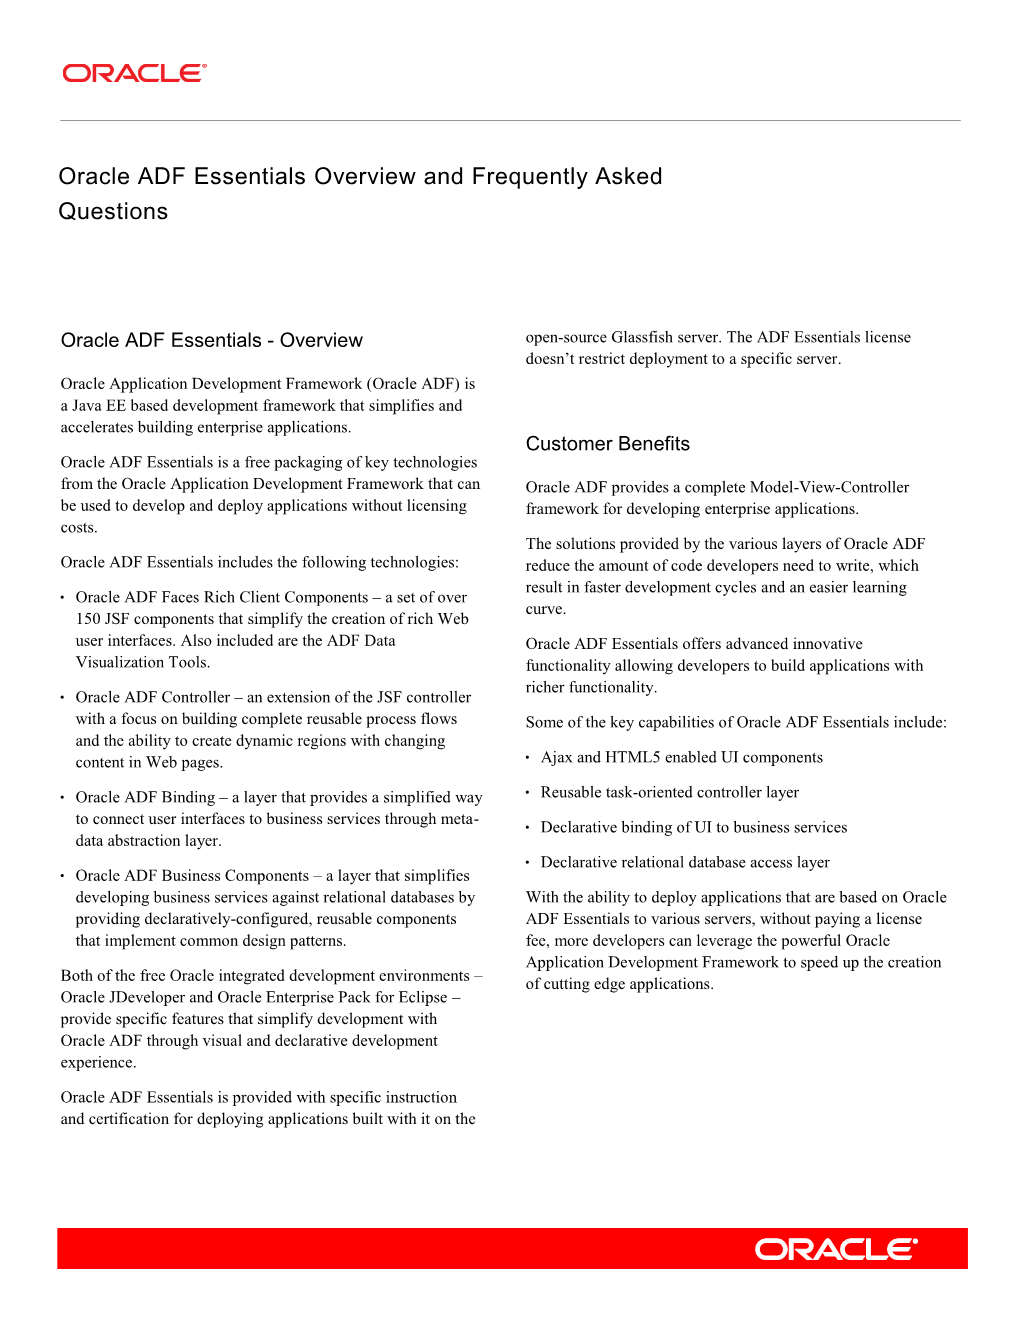 Oracle ADF Essentials Overview and Frequently Asked Questions